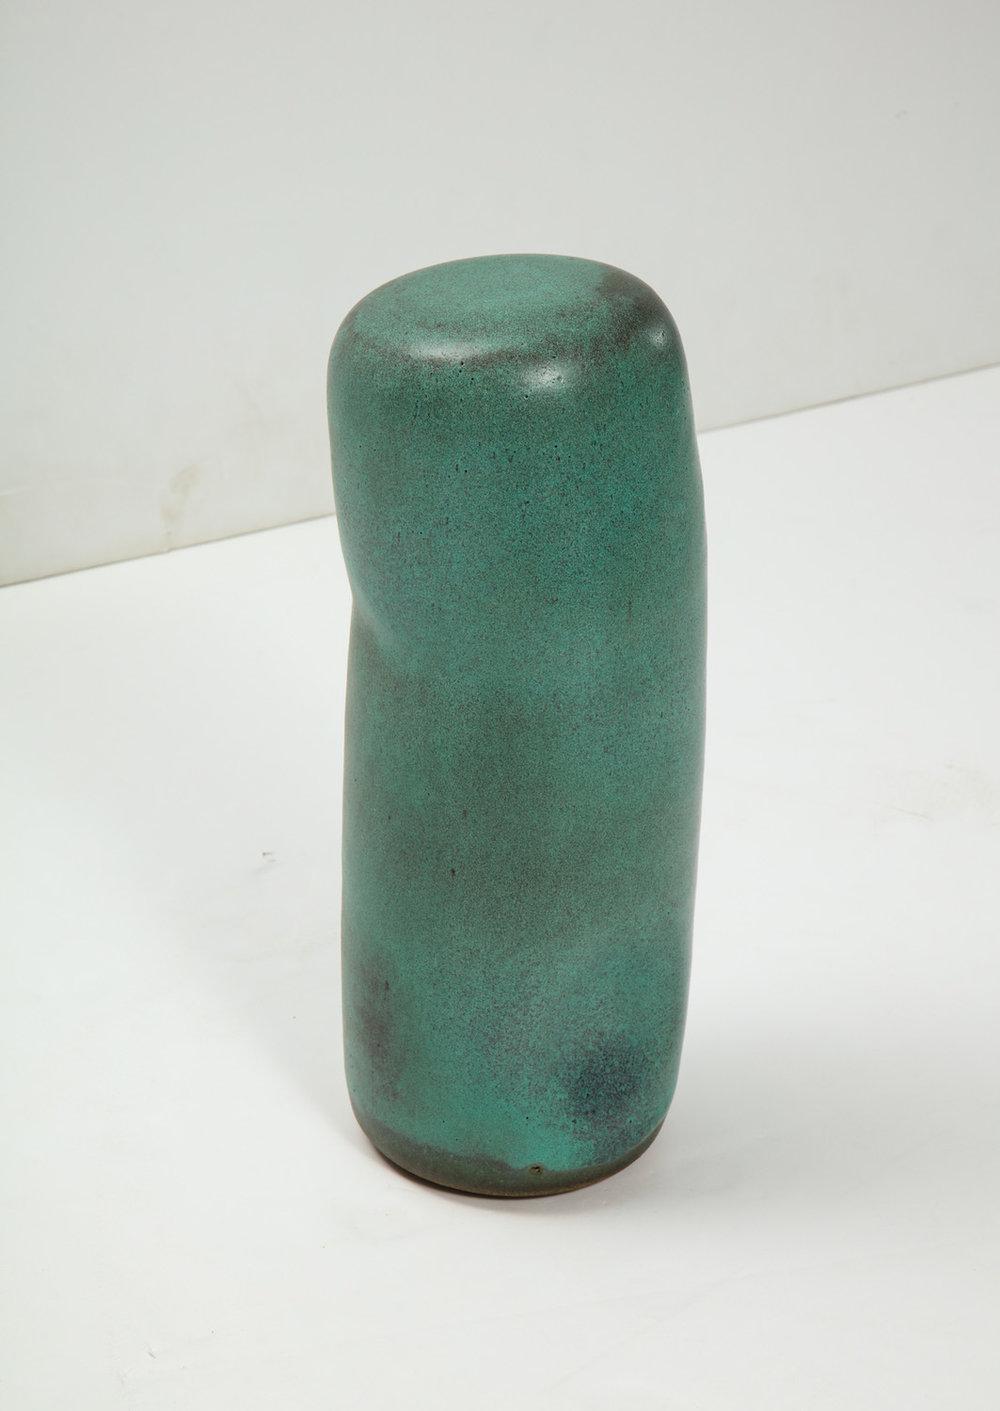 Glazed TOTEM Sculpture #1 by David Haskell For Sale